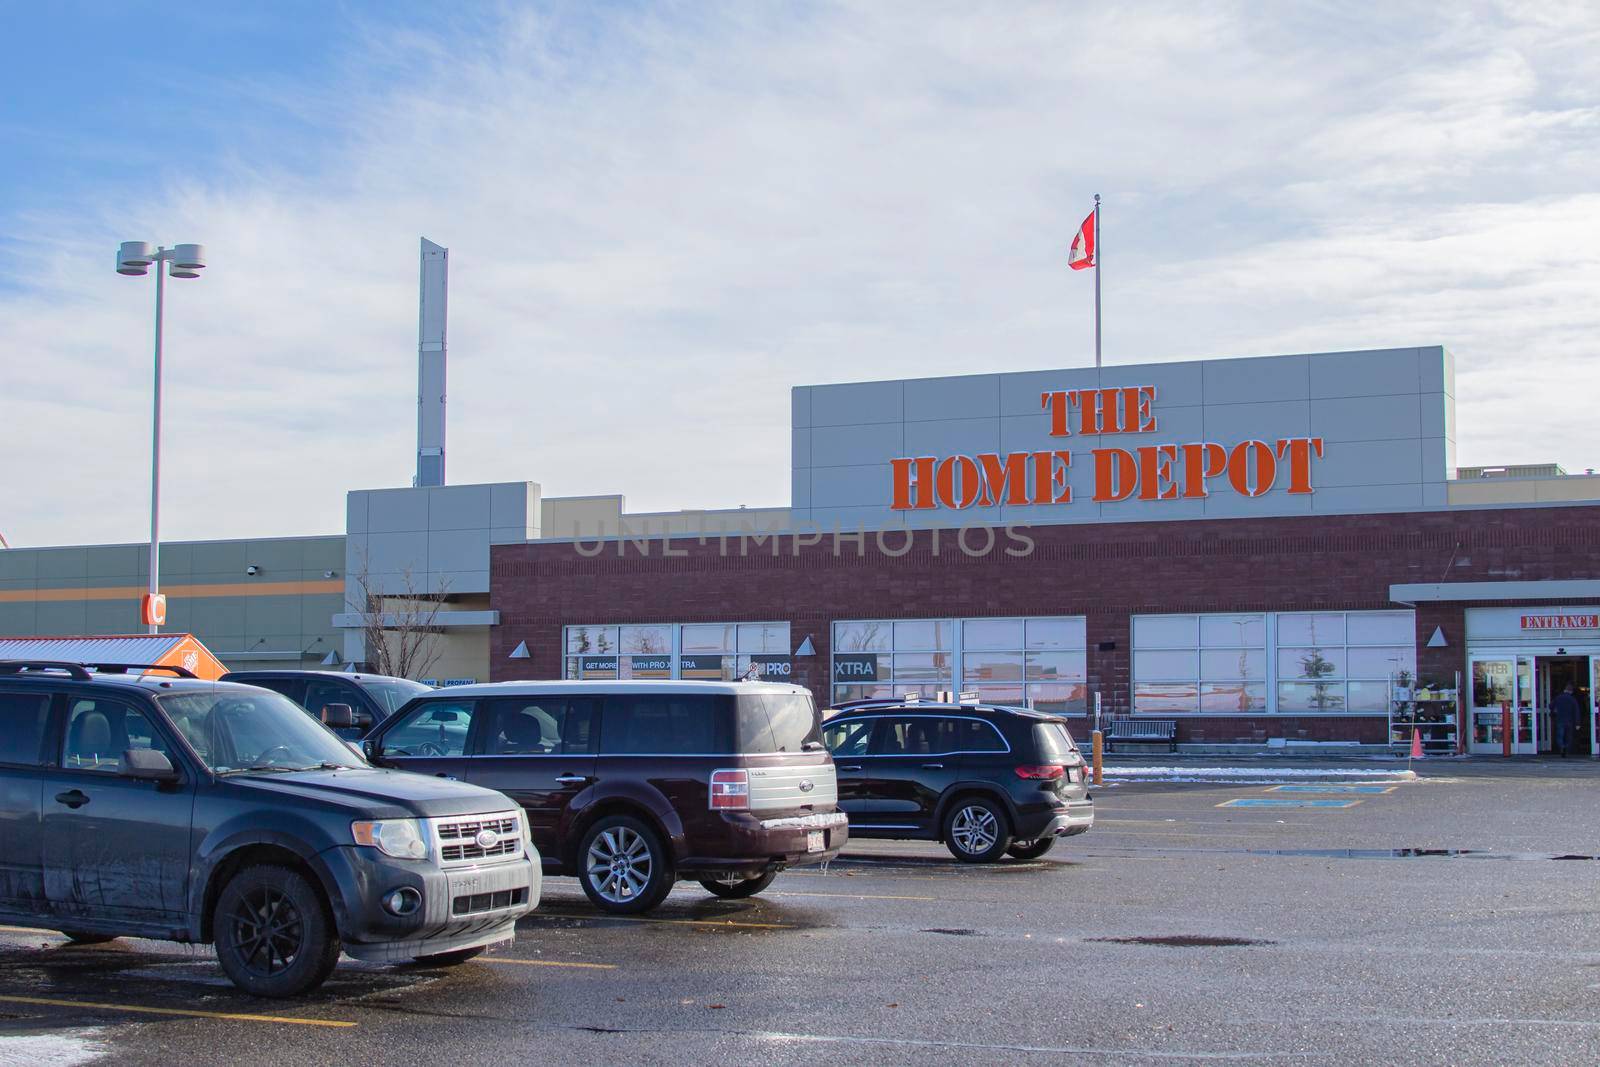 Calgary Alberta, Canada. Oct 17, 2020. The Home Depot is the largest home improvement retailer in the United States, supplying tools, construction products, and services. by oasisamuel